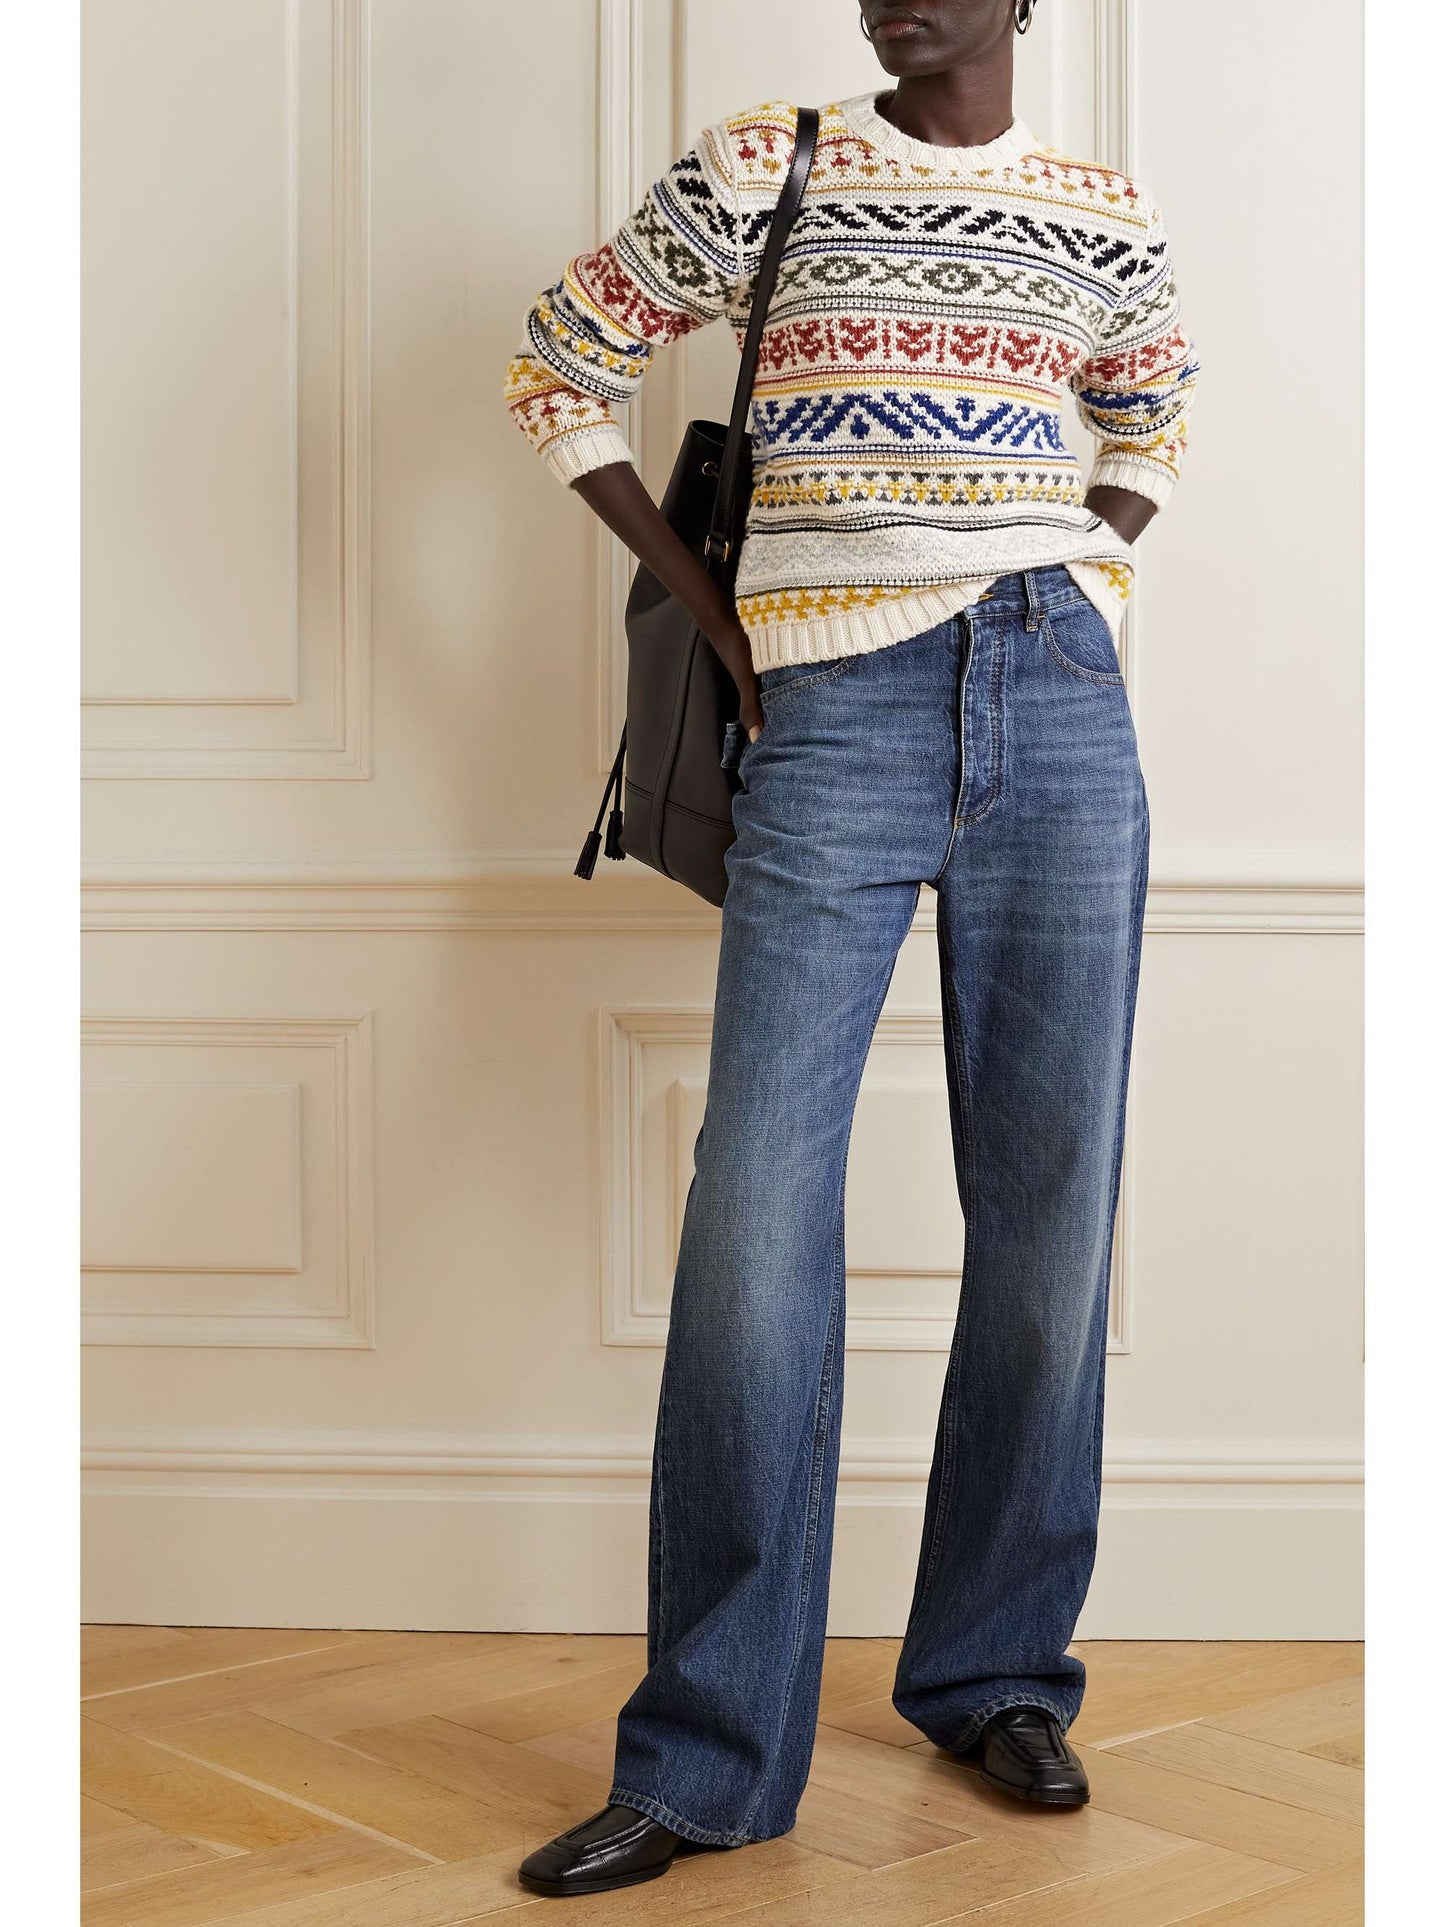 "Model wearing a custom 100% cotton women's sweater with a colorful Fair Isle pattern, paired with high-waisted blue jeans. The sweater features intricate knit designs in red, blue, yellow, and green on a cream background. The model is posing with one hand in the pocket."